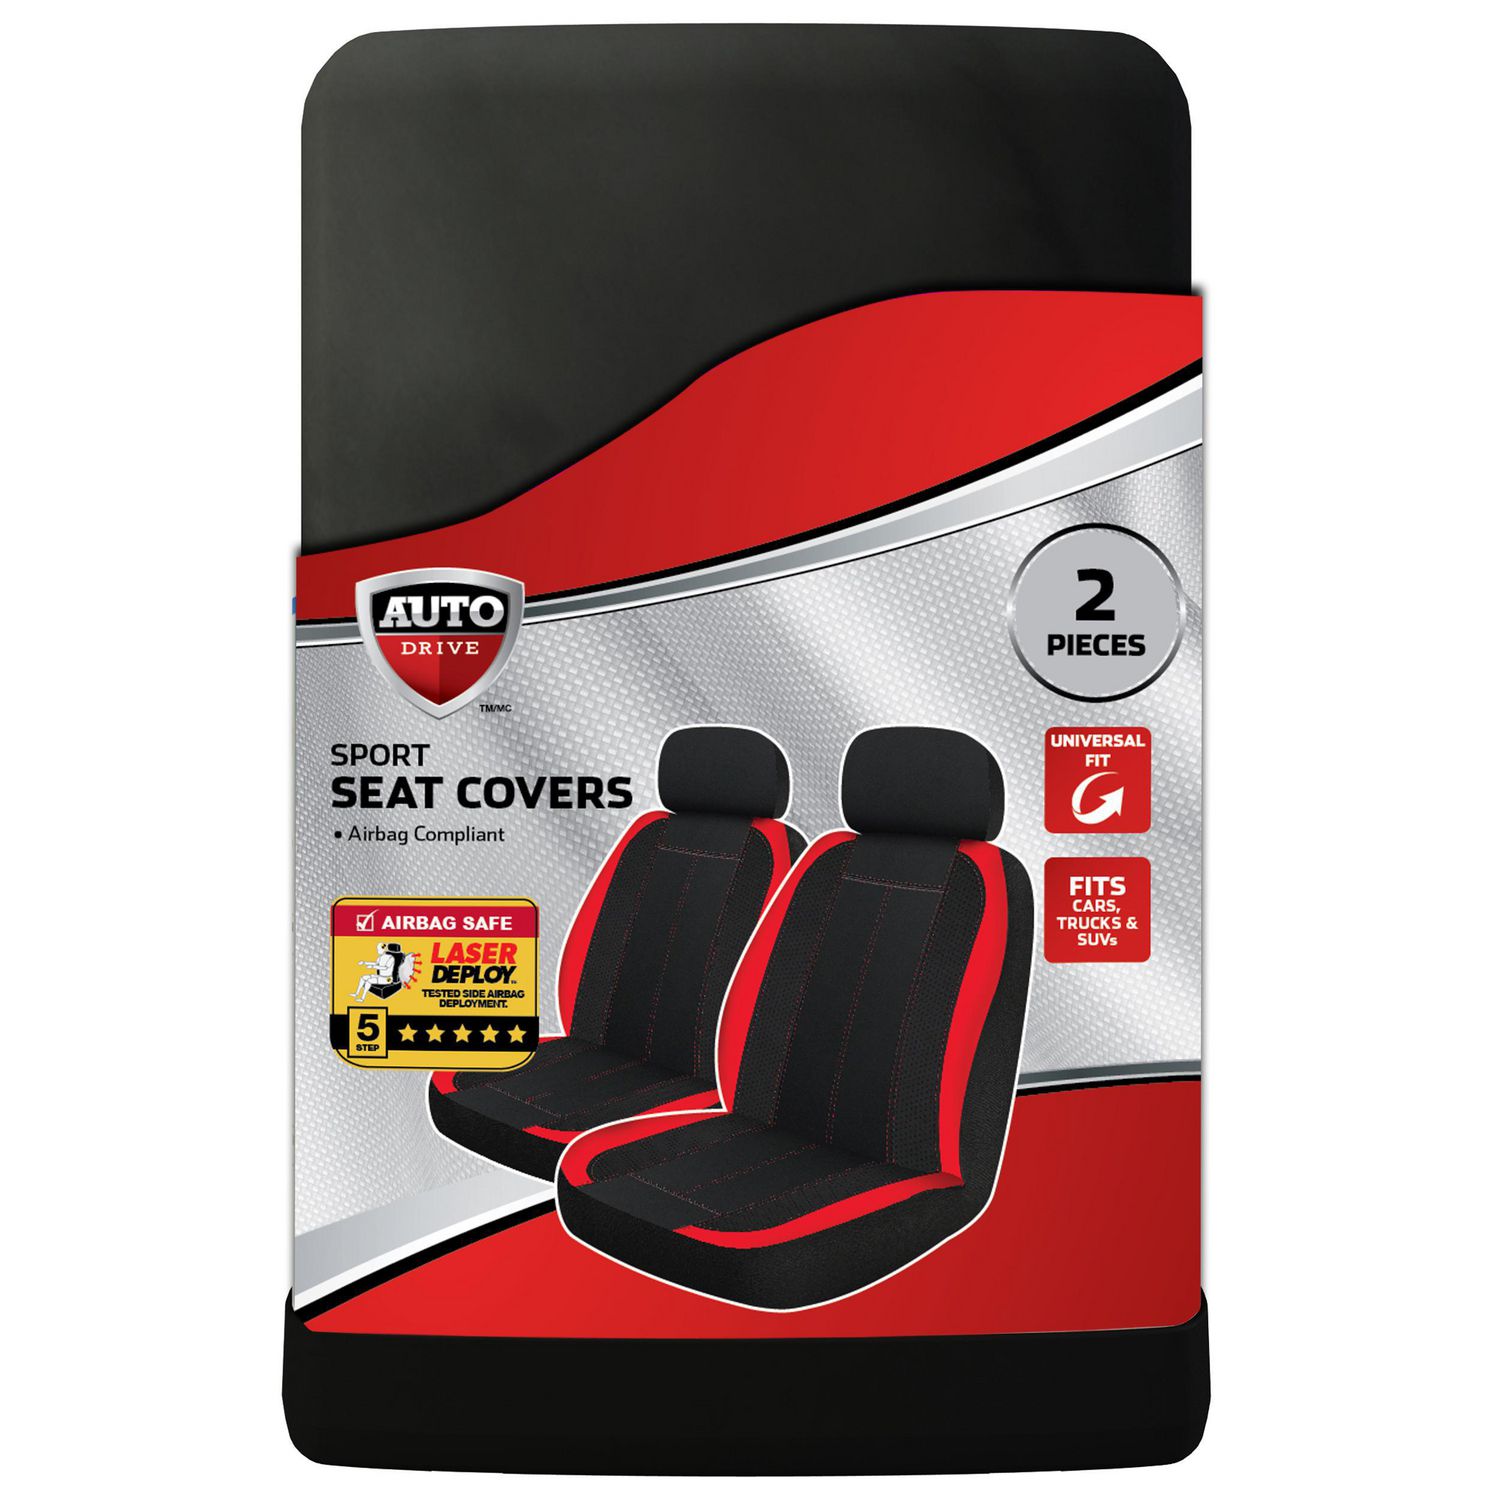 Auto Drive LB 2pc Black Red Seat Cover, 2pc Black Red Seat Cover 